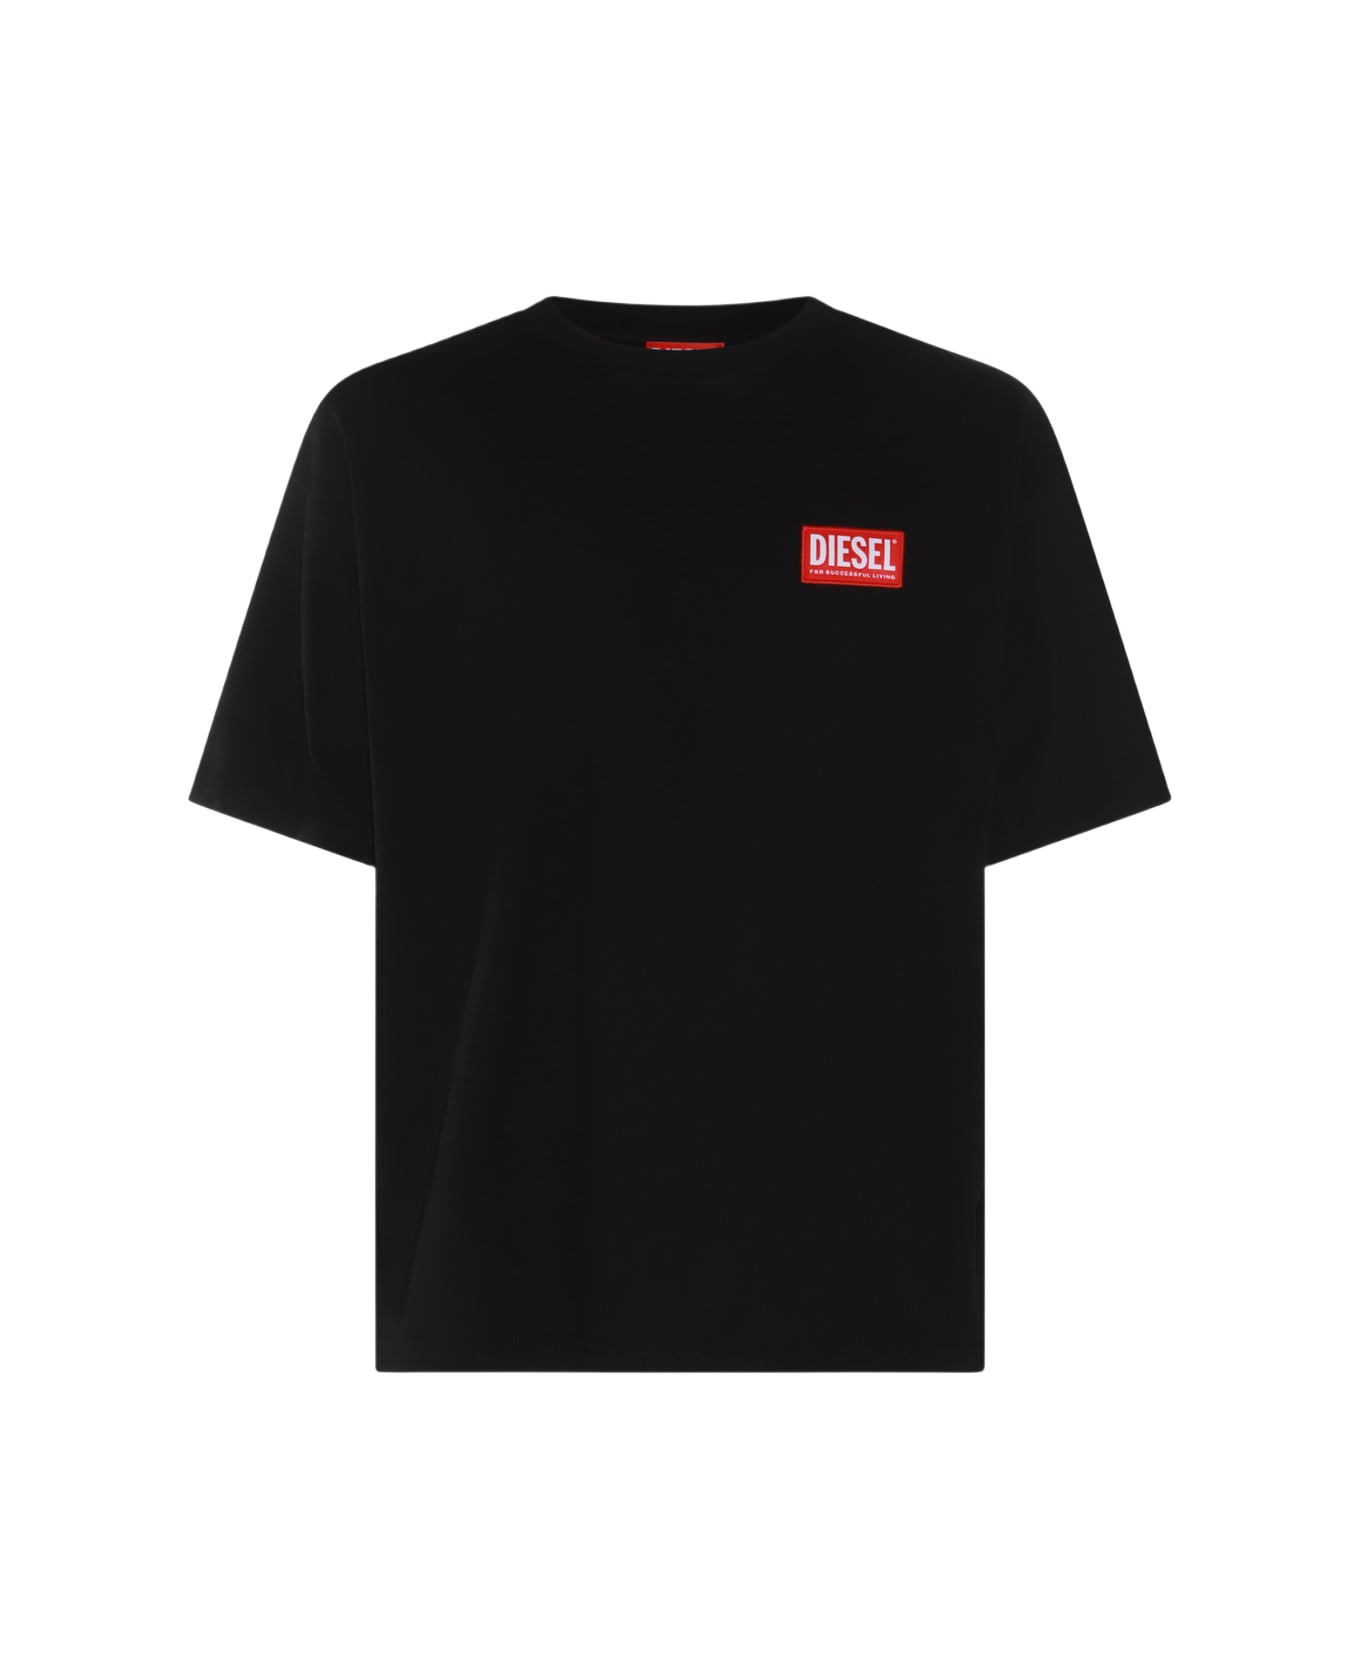 Diesel Black And Red Cotton T-shirt - Black